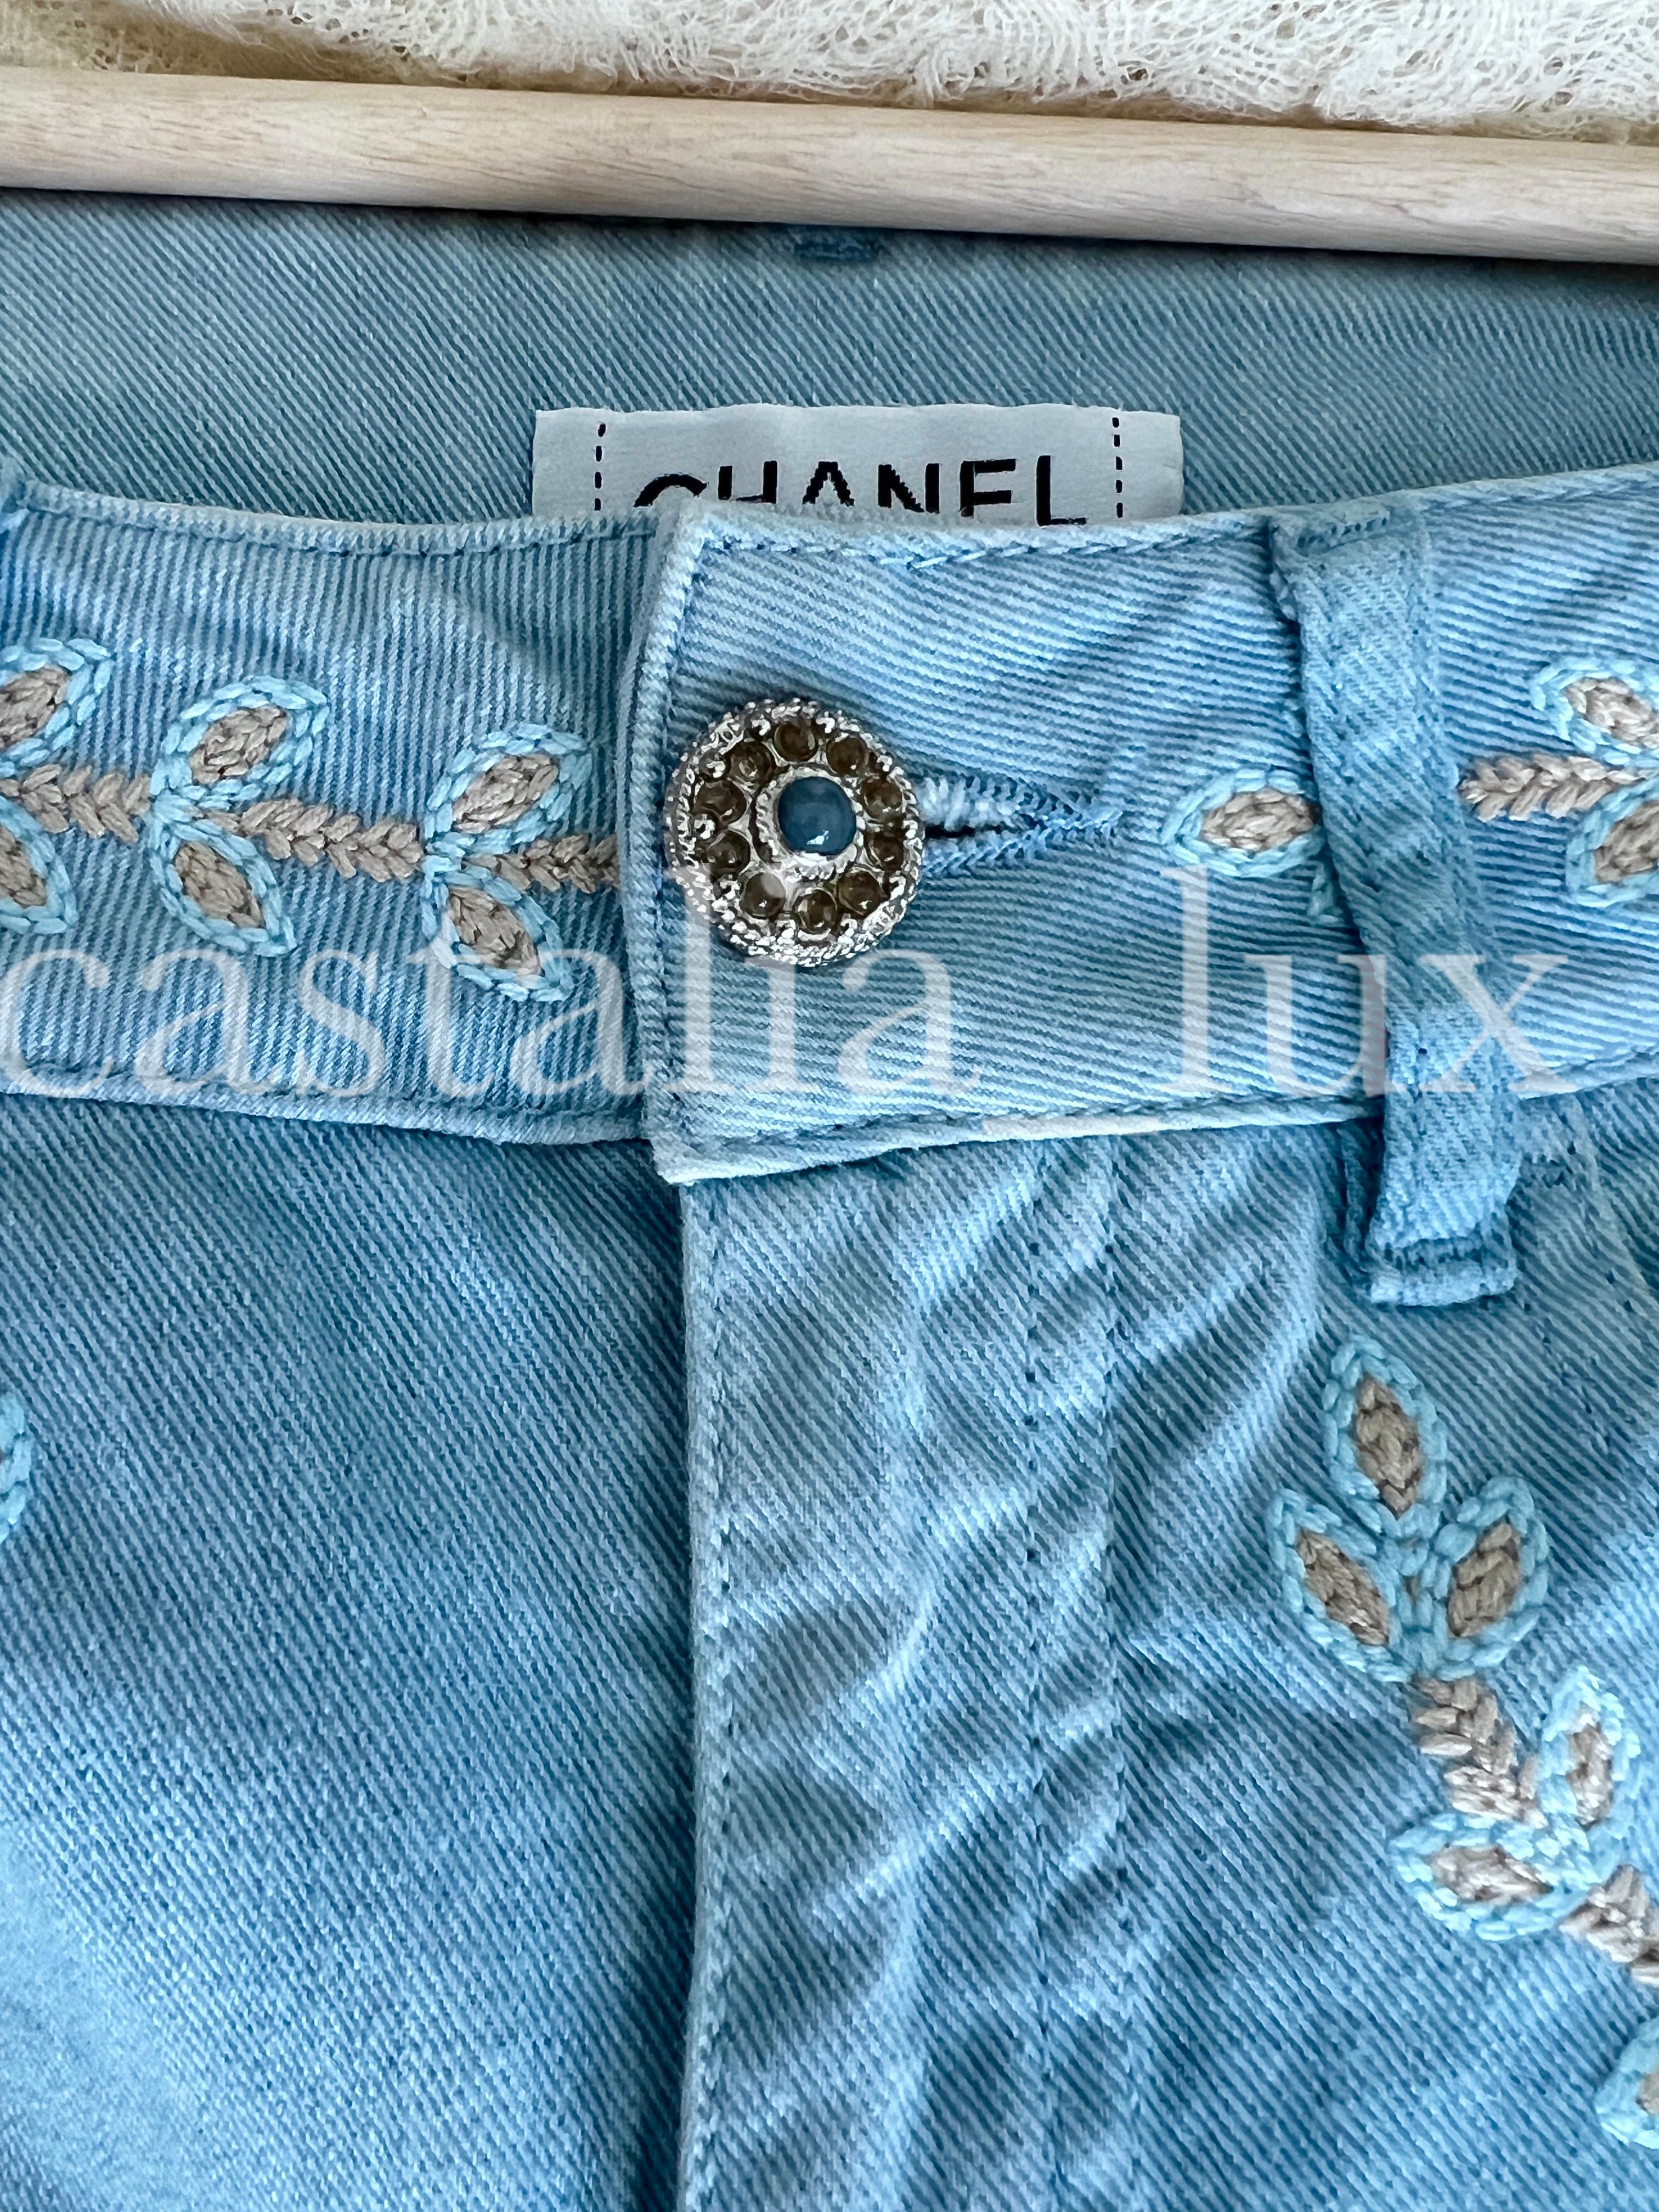 Chanel New CC Logo La Riviera Collection Runway Jeans For Sale 1